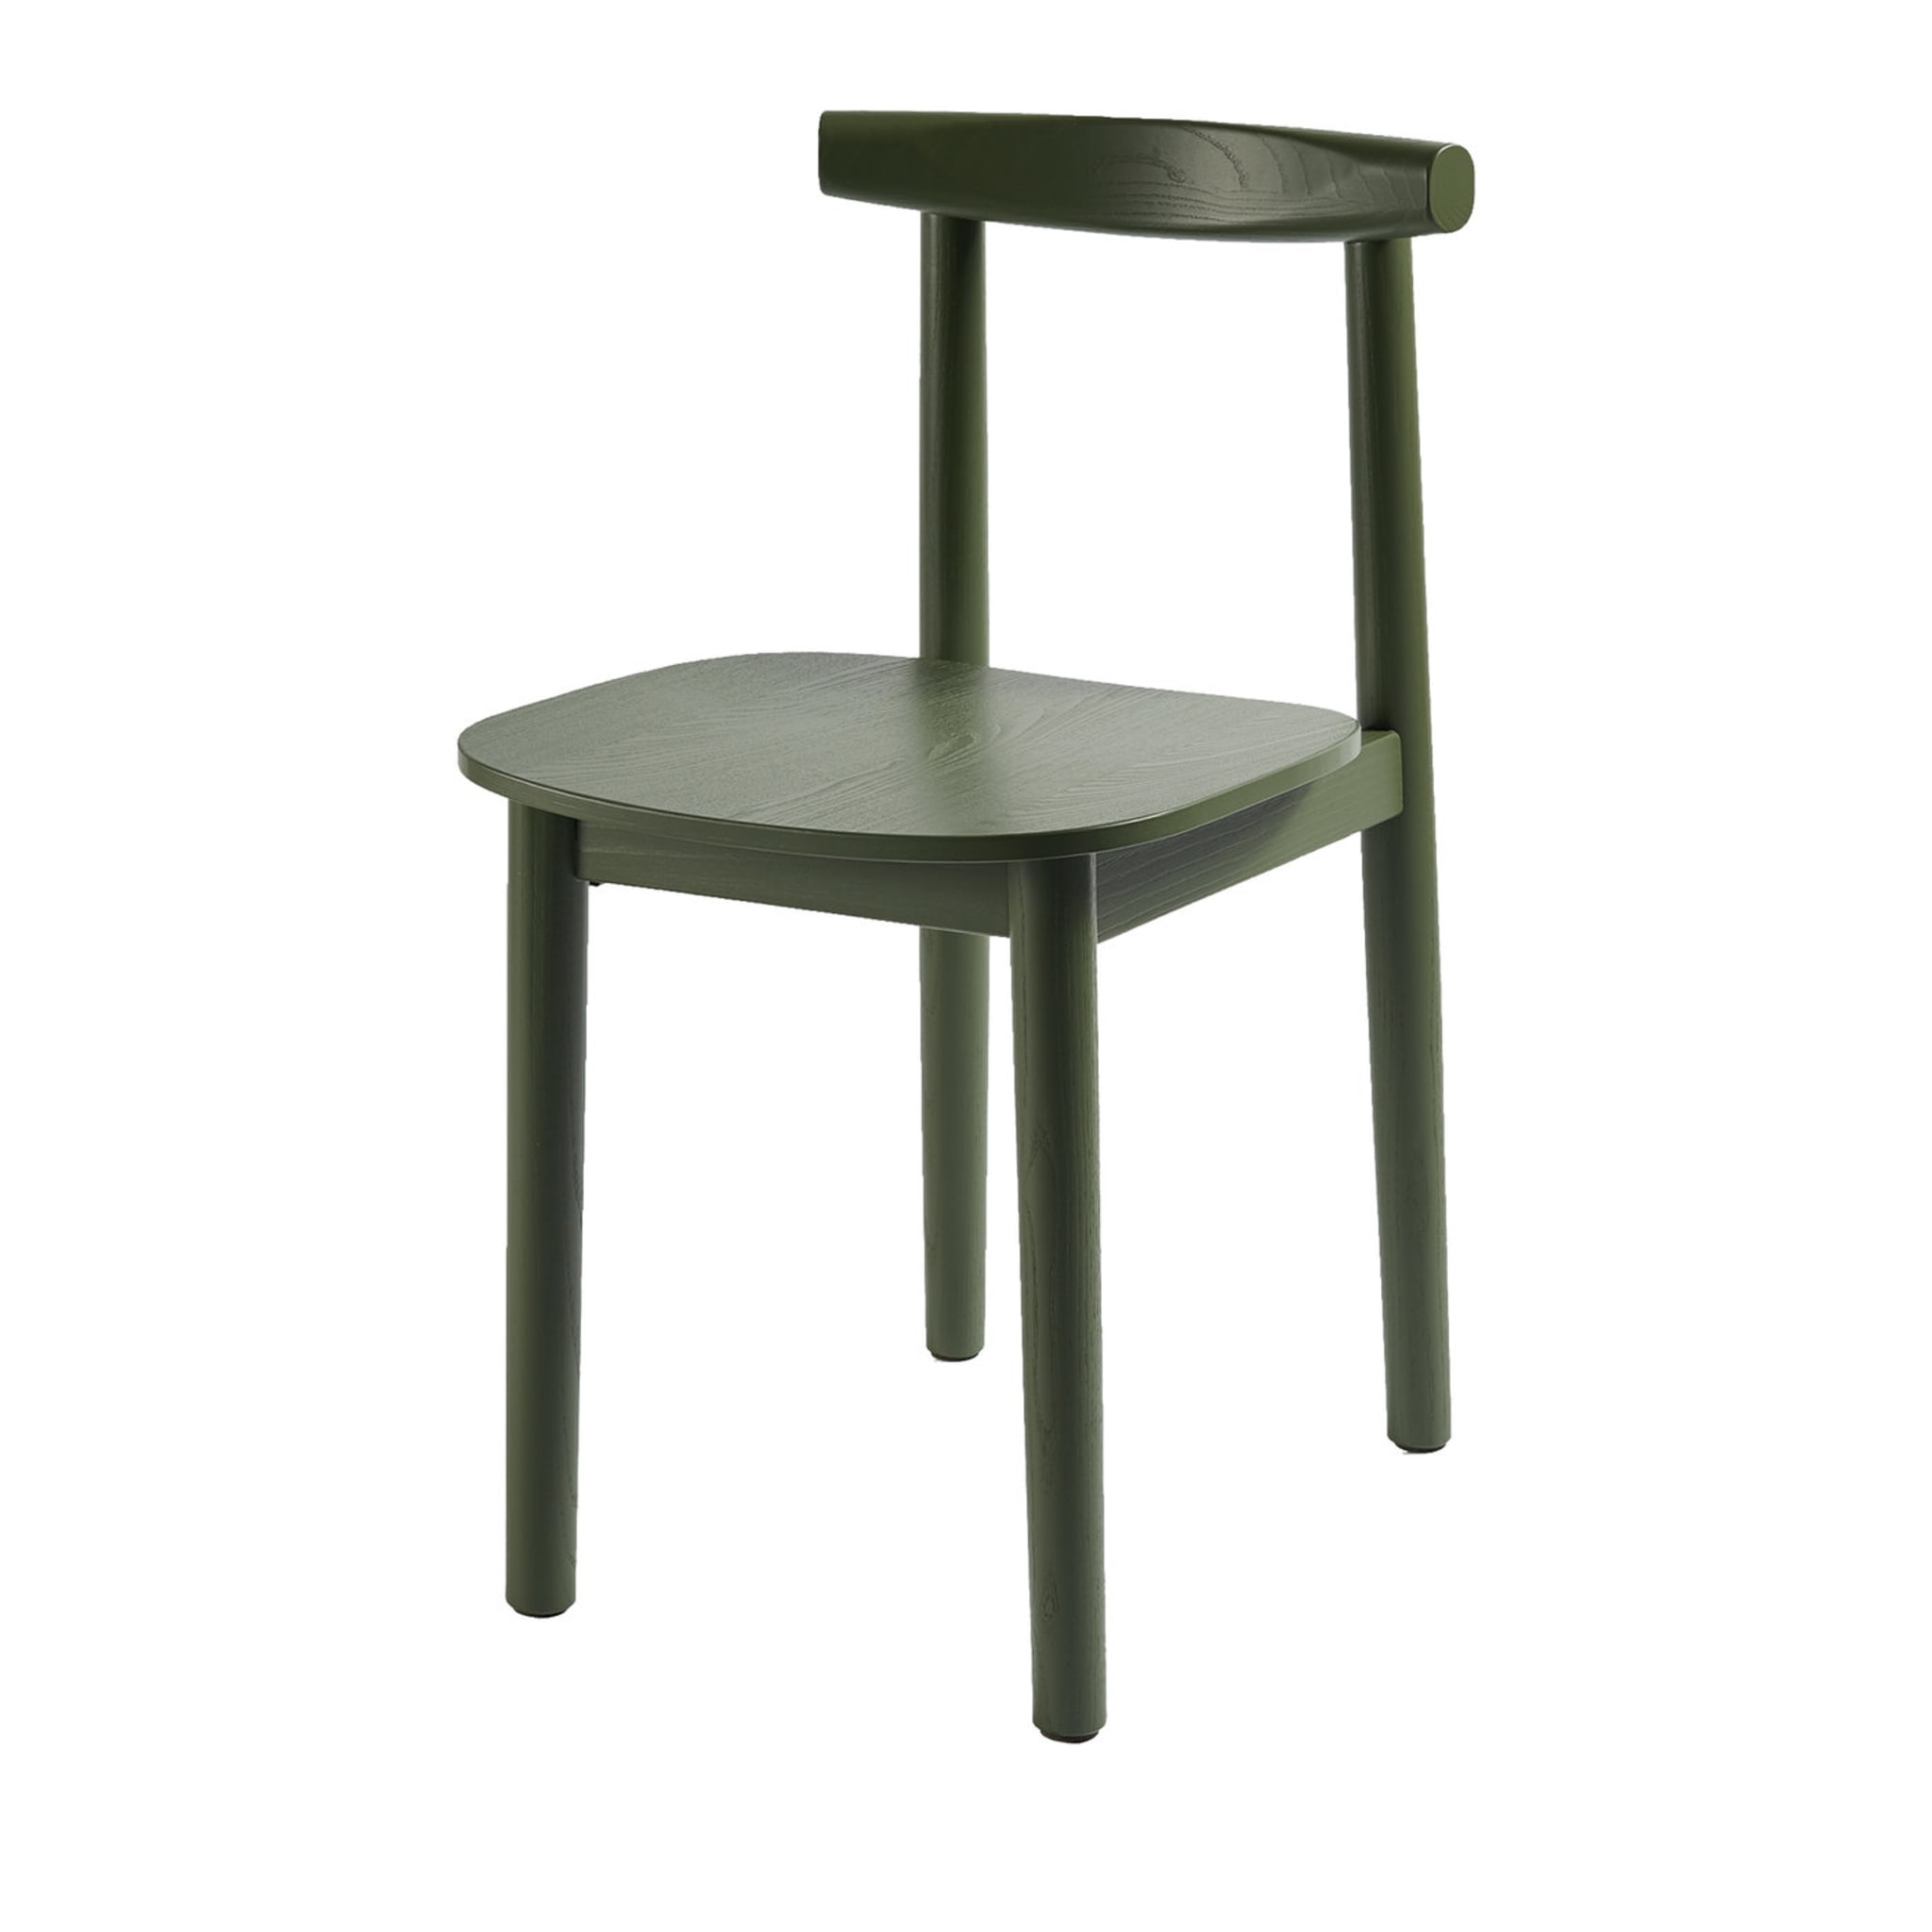 Lola Green Dining Chair - Main view